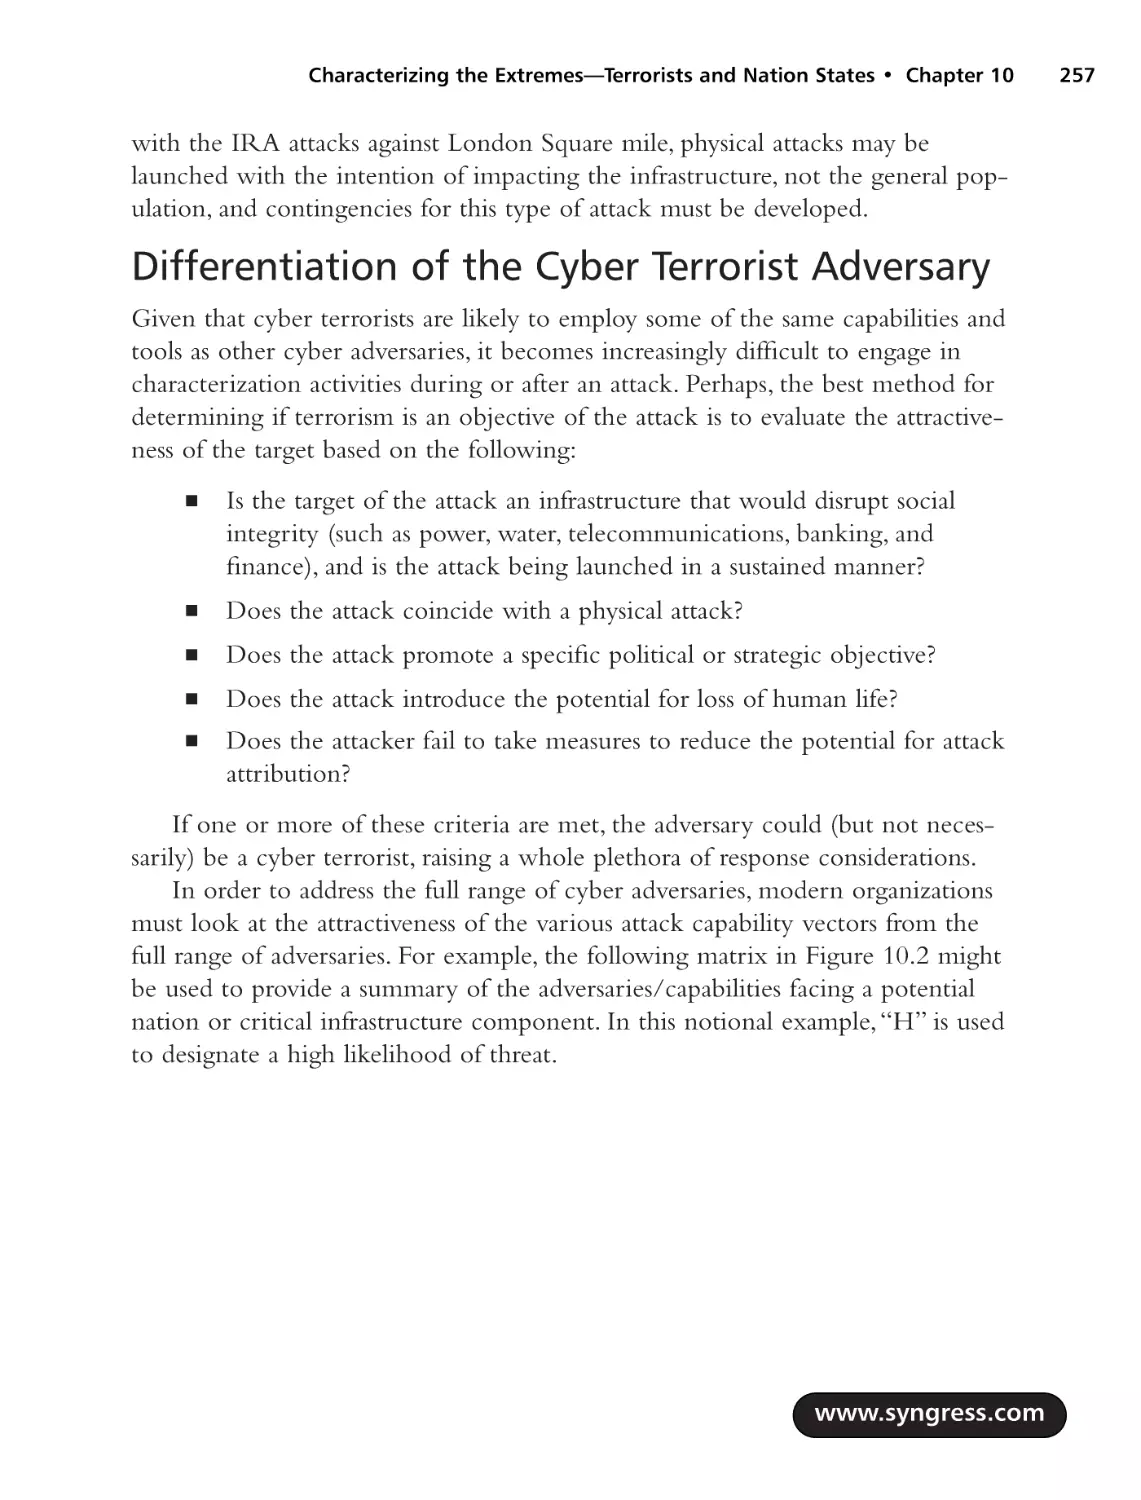 Differentiation of the Cyber Terrorist Adversary